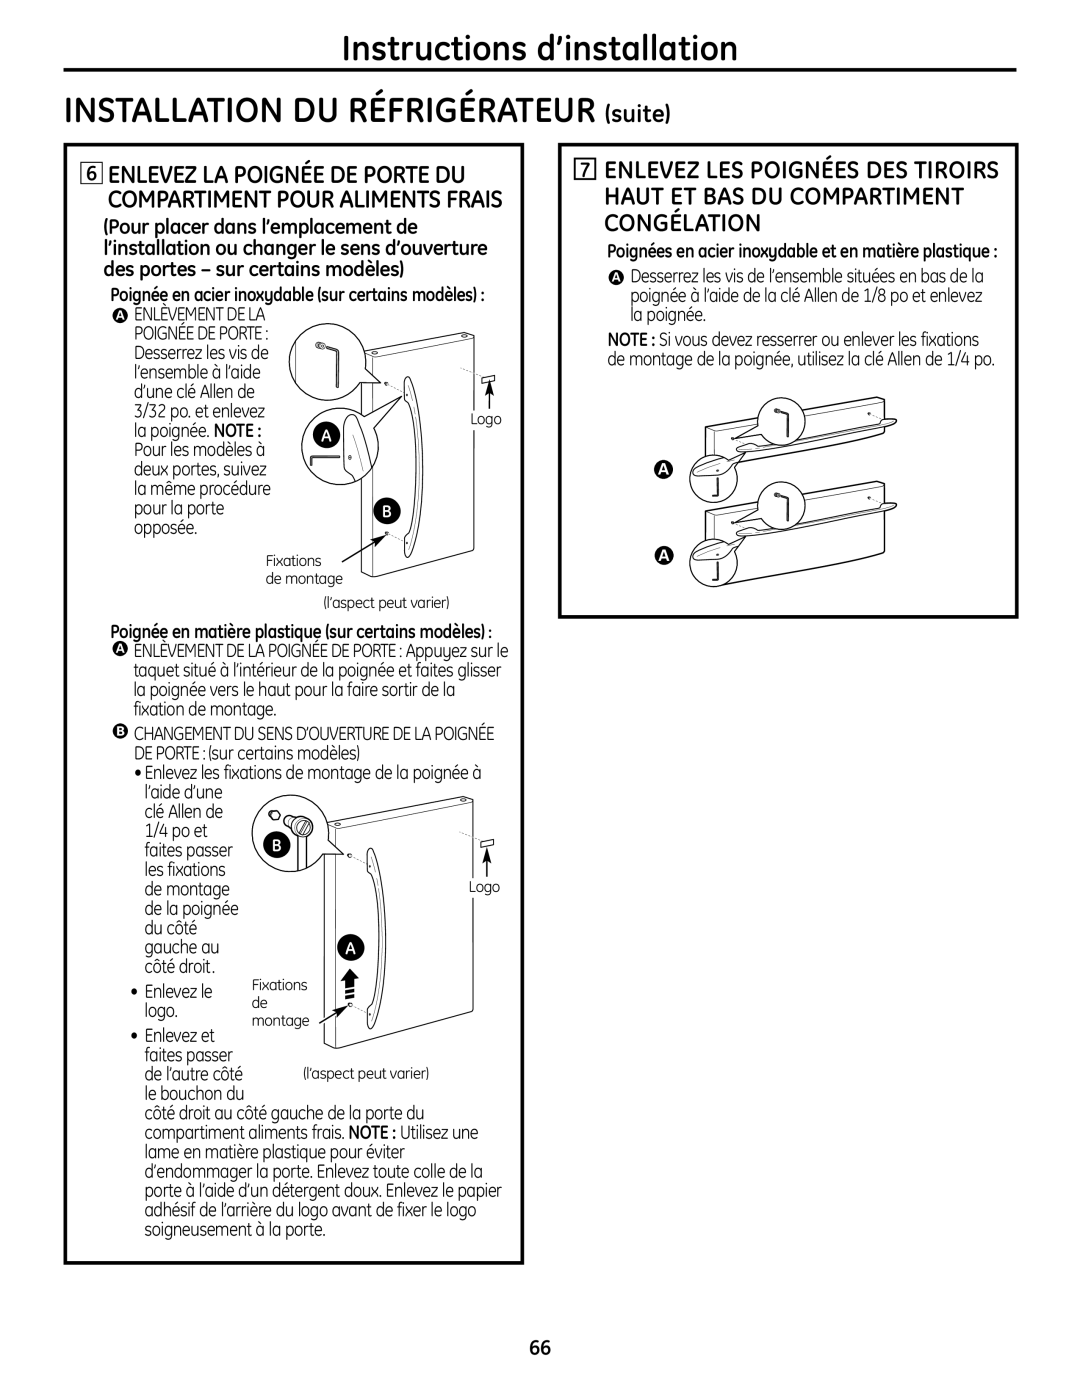 GE 225D1804P001 installation instructions Instructions d’installation INSTALLATION DU RÉFRIGÉRATEUR suite 